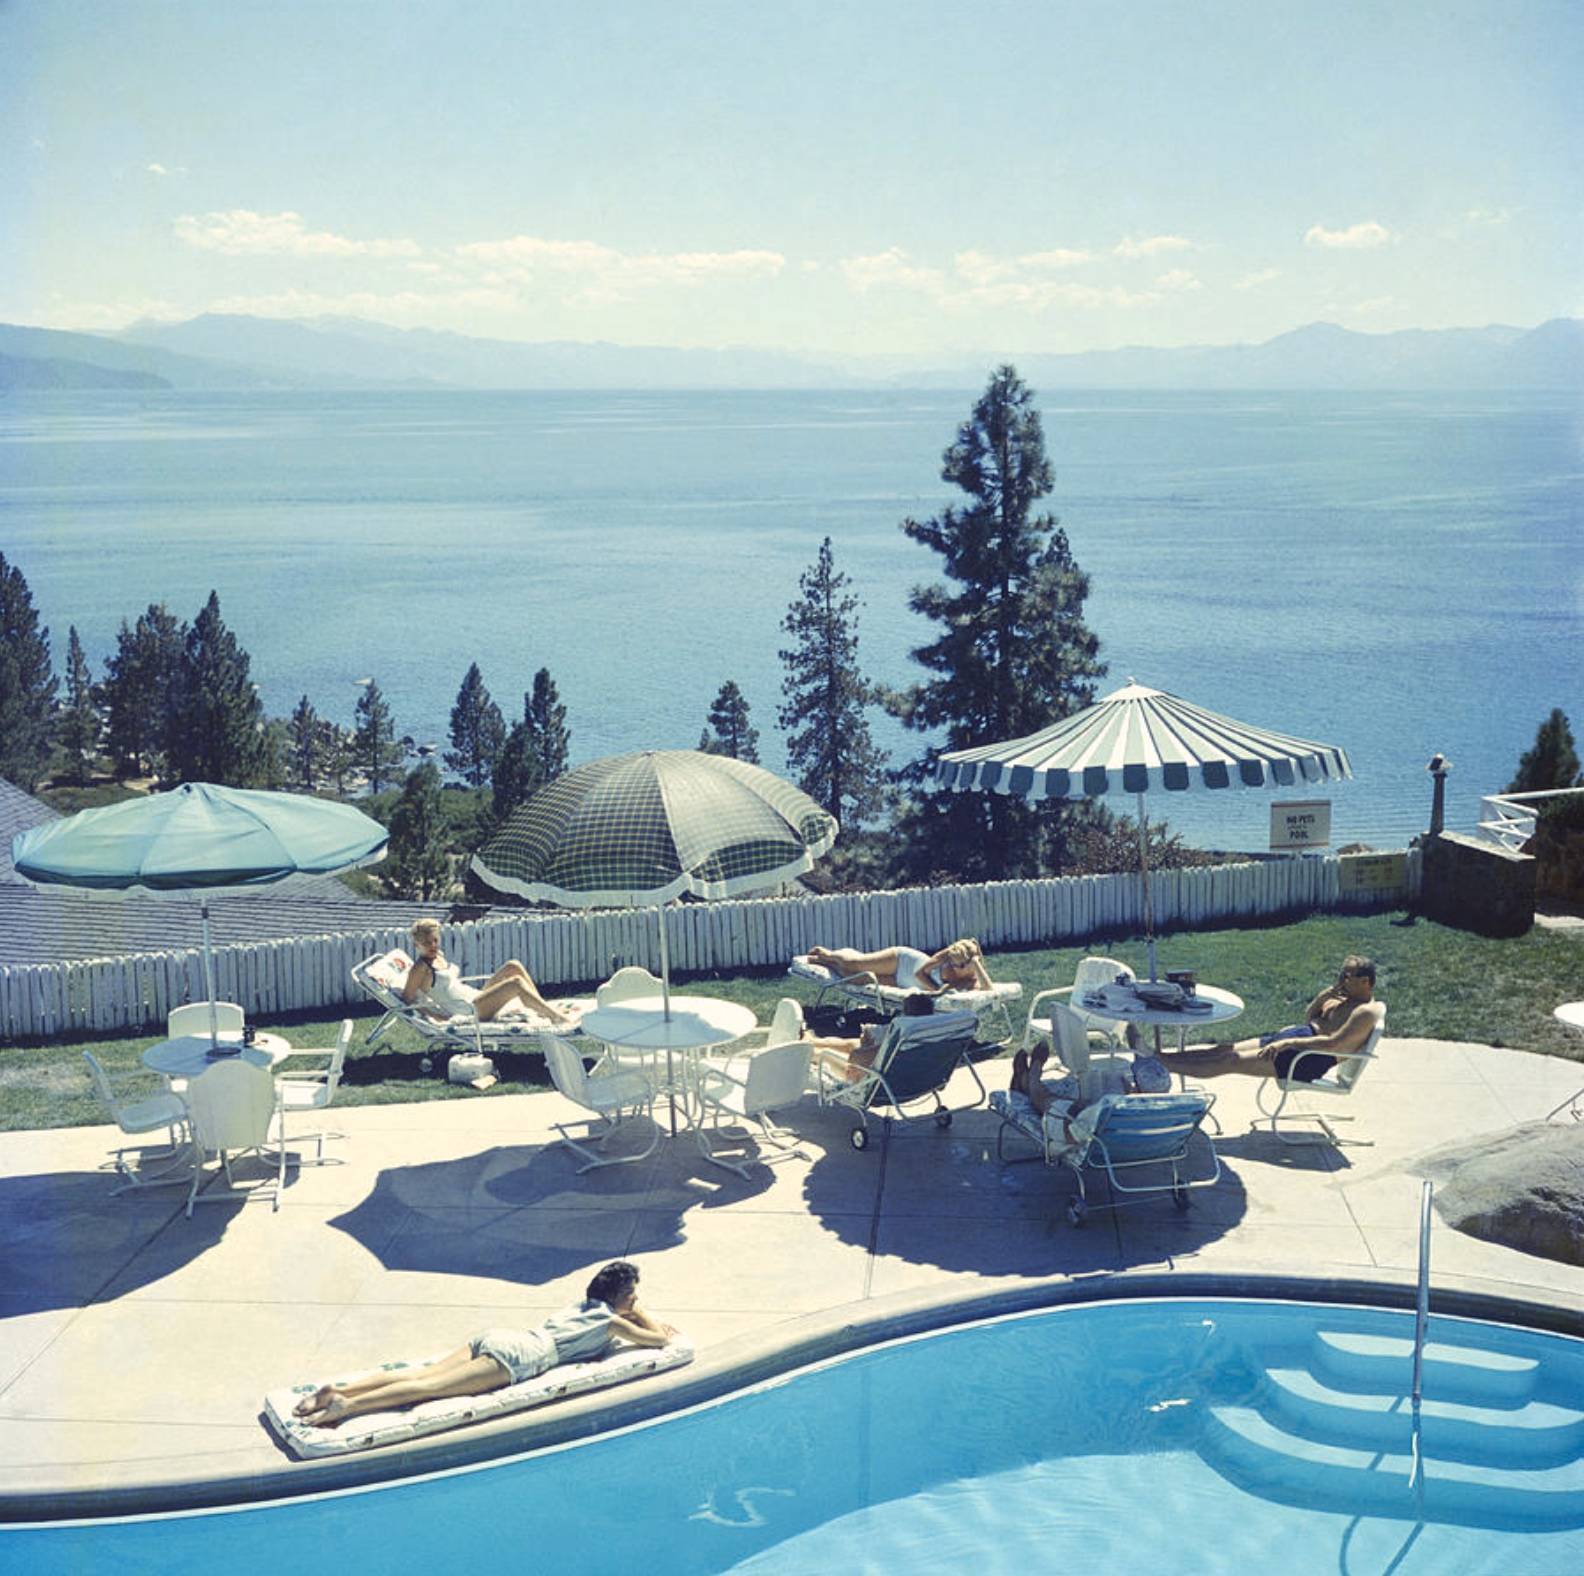 Relaxing at Lake Tahoe by Slim Aarons - A photograph captured in 1959 taken in the distance of some sun umbrellas and people sitting around a pool. 